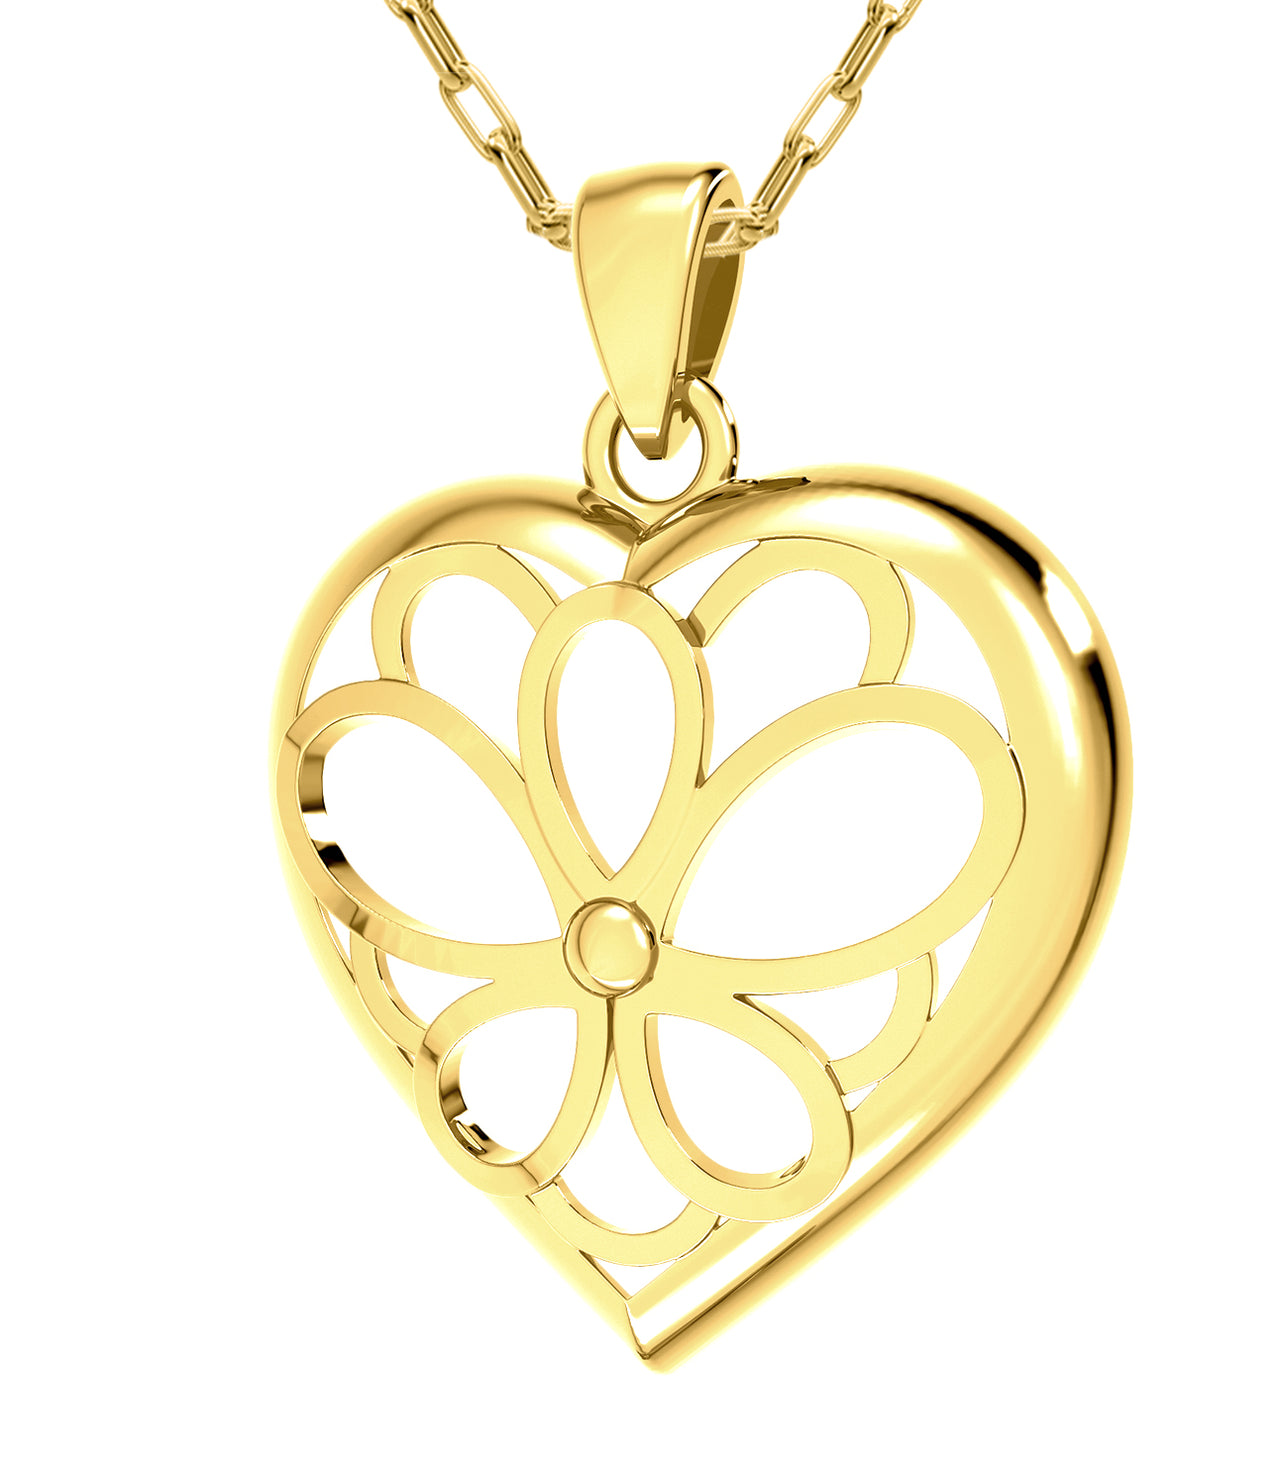 Ladies 14k Gold Flower in Heart Pendant Necklace